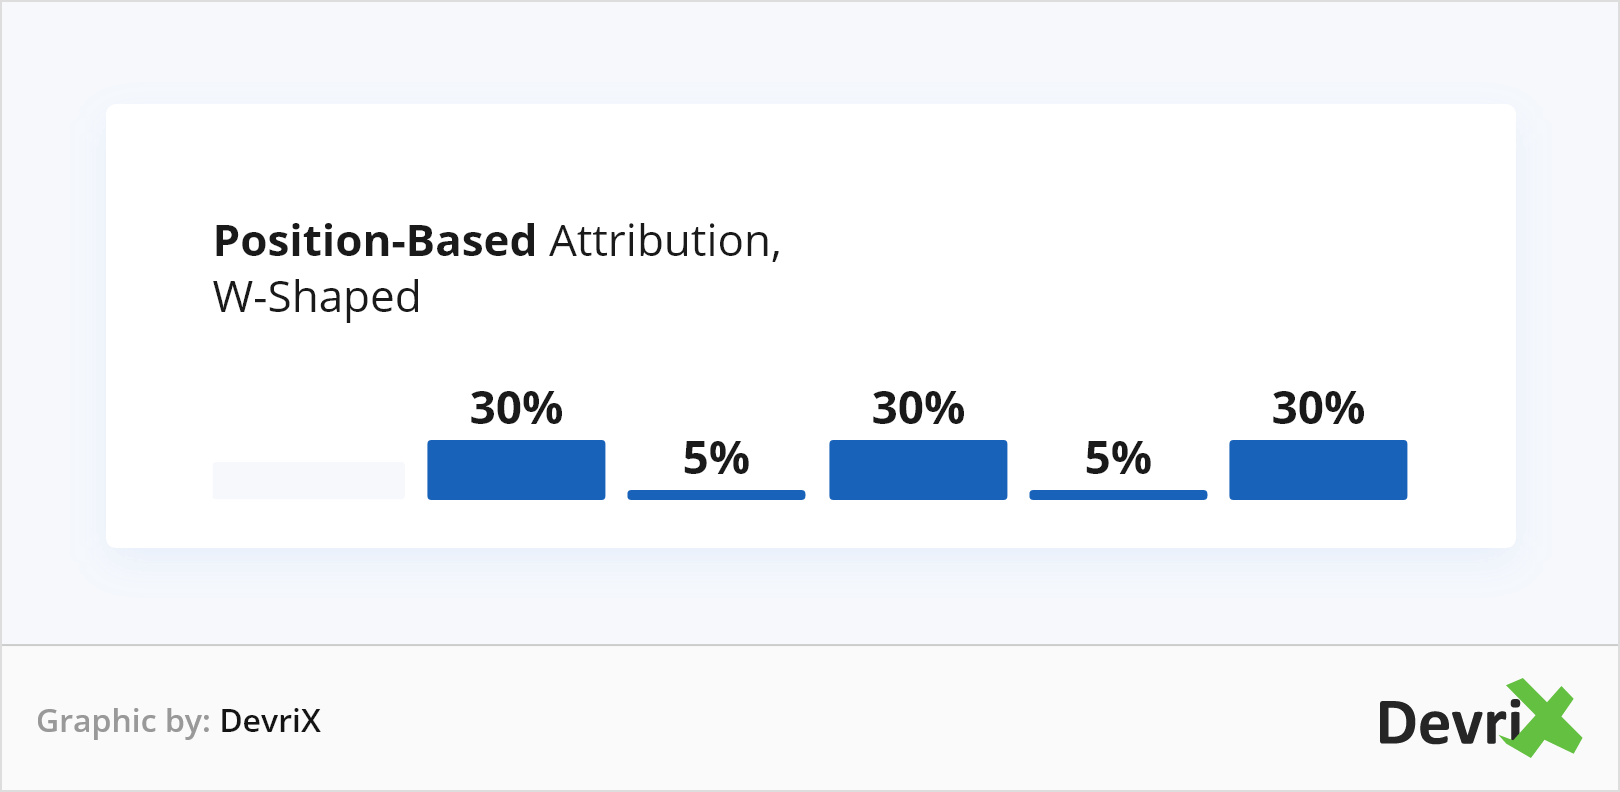 Position-Based Attribution W-Shaped